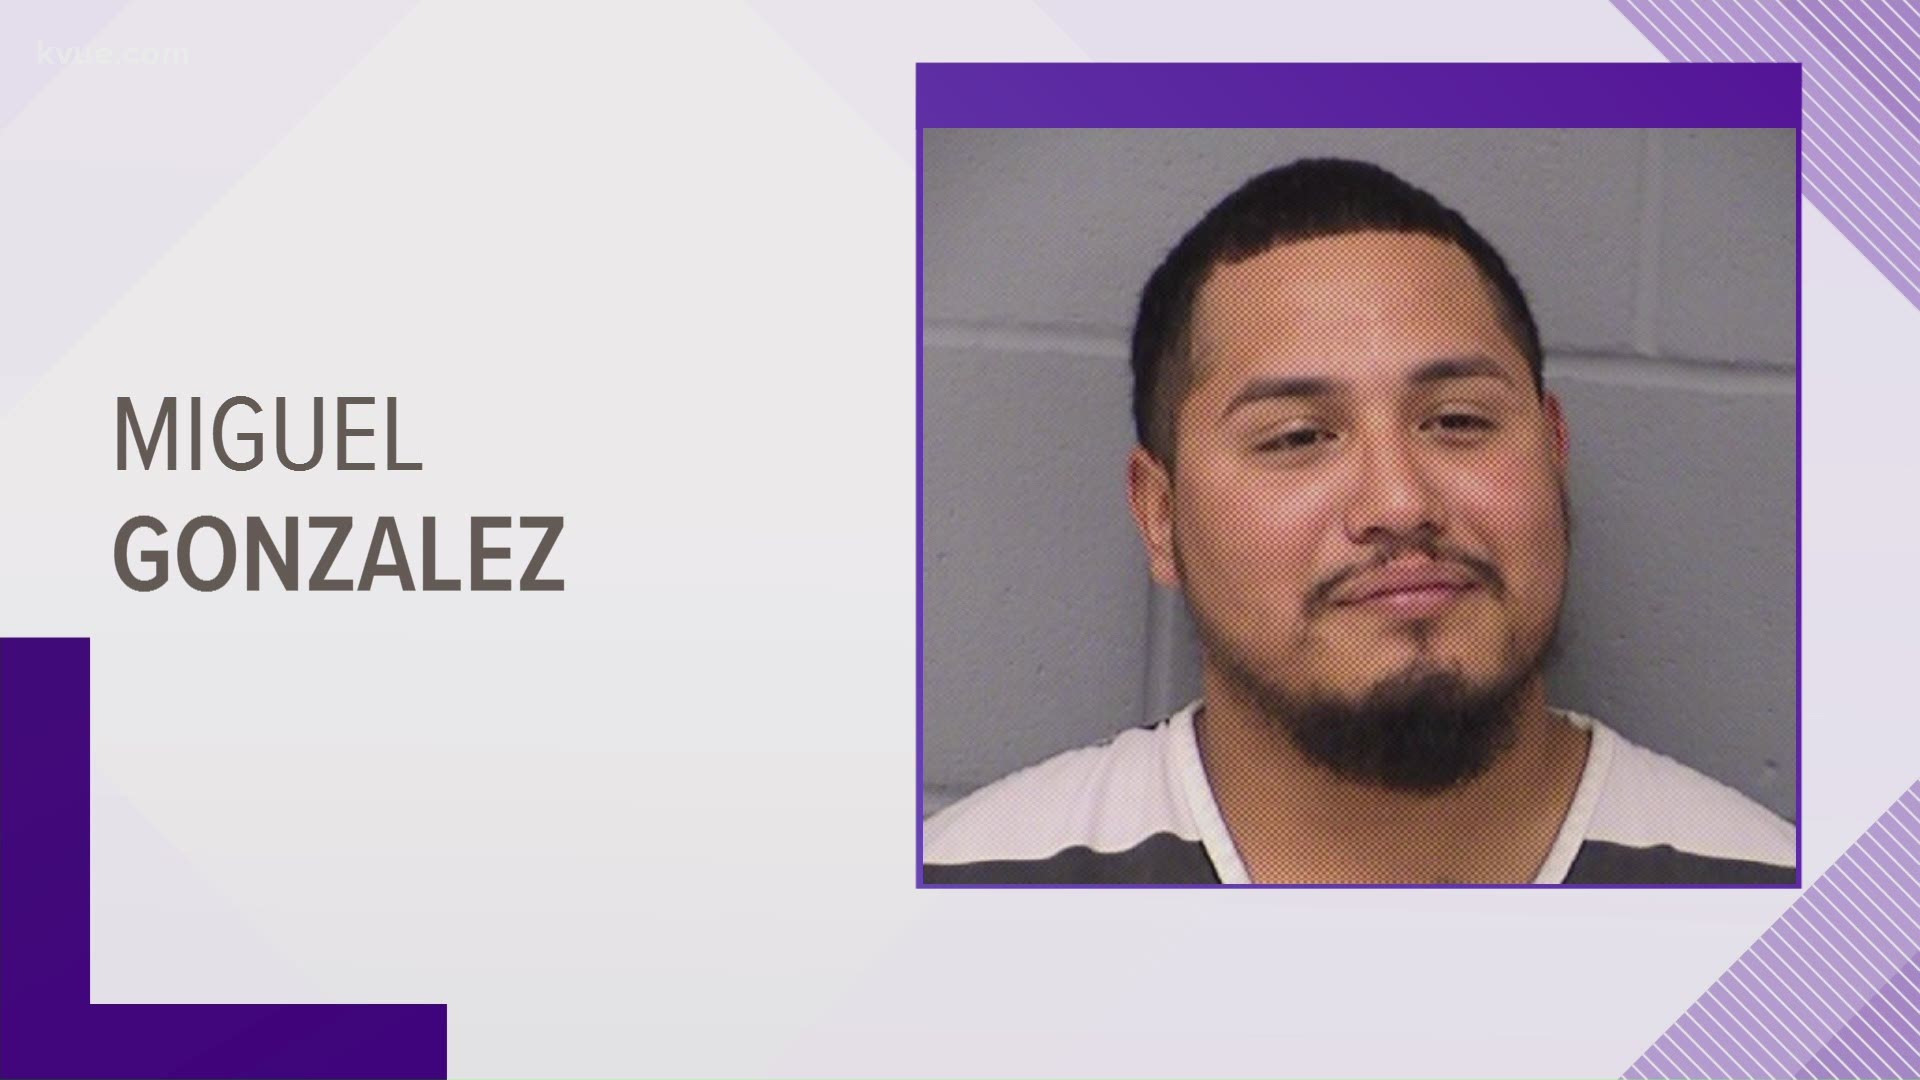 A man has been arrested in connection to the death of a baby who was found in a Travis County apartment back in July.